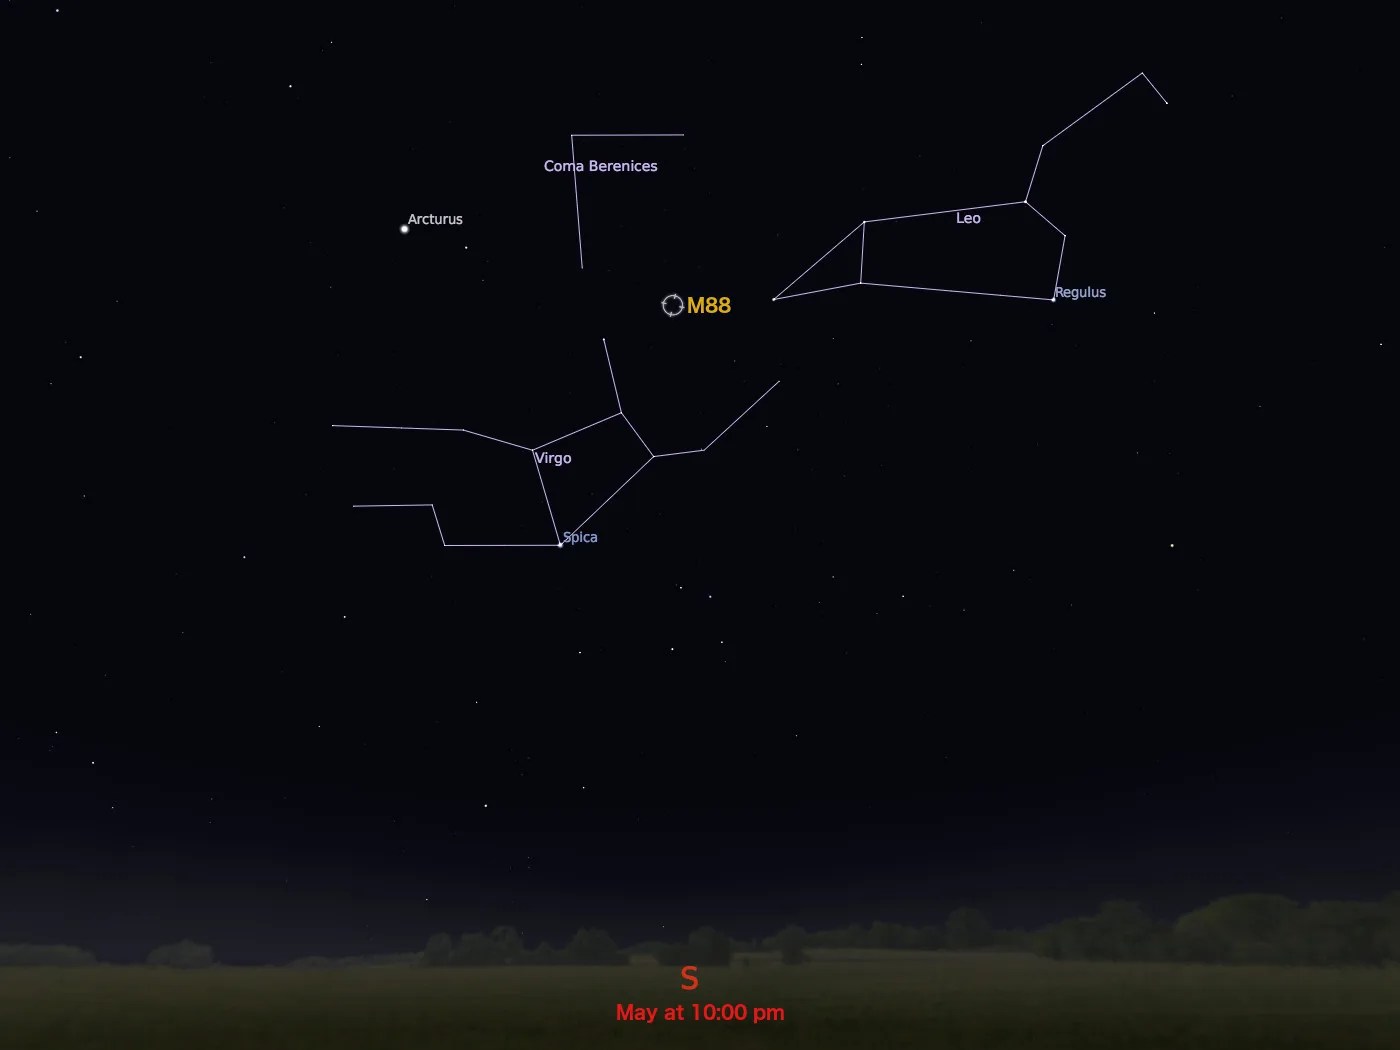 star chart showing location in night sky of M88